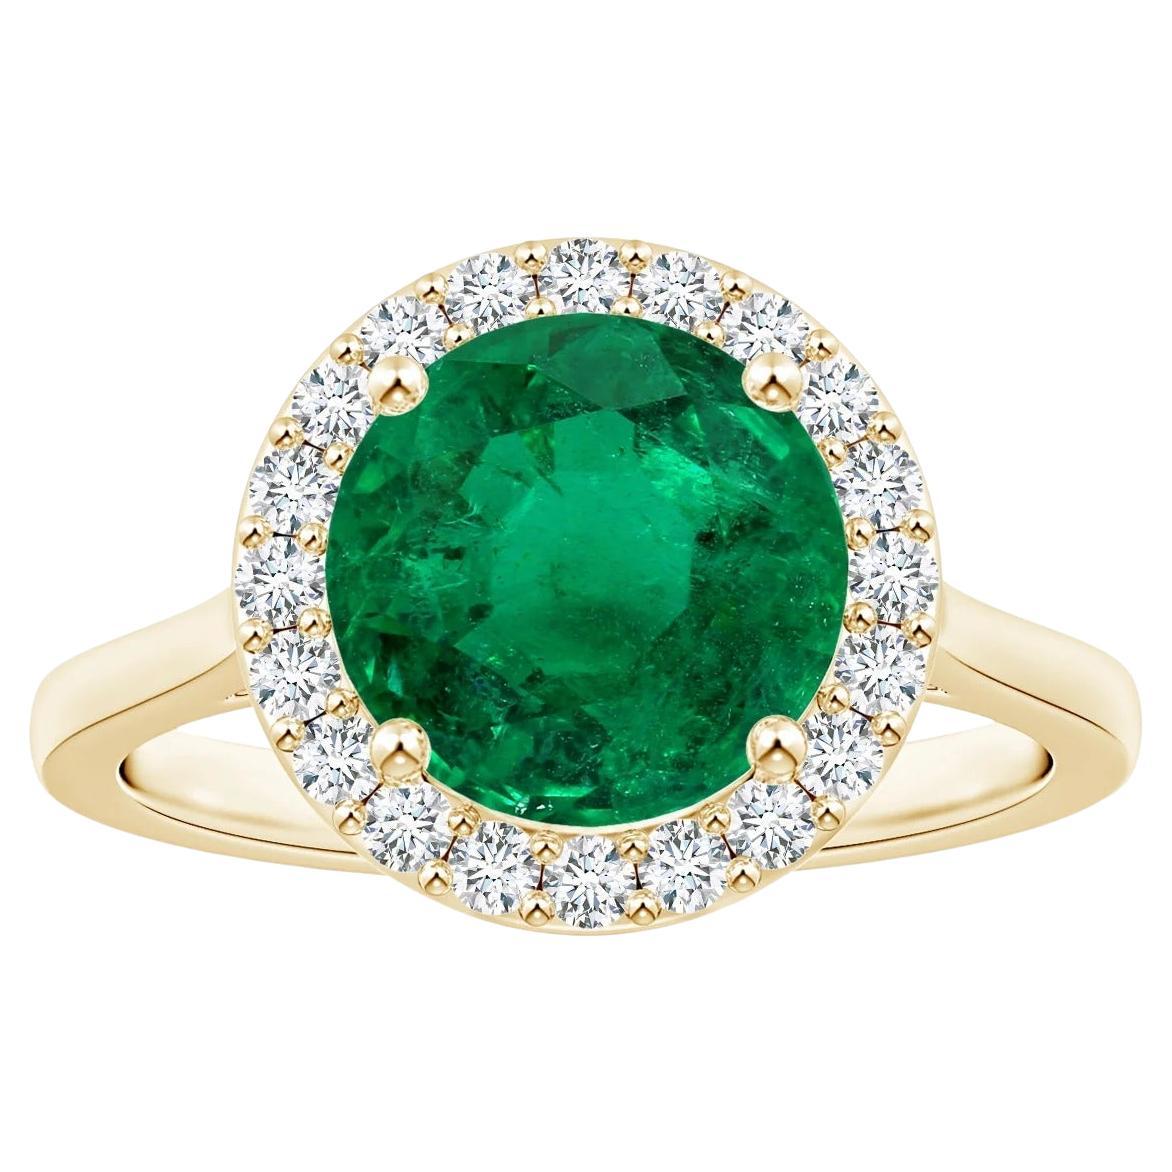 For Sale:  Angara Gia Certified Natural Round Emerald Ring in Yellow Gold with Halo